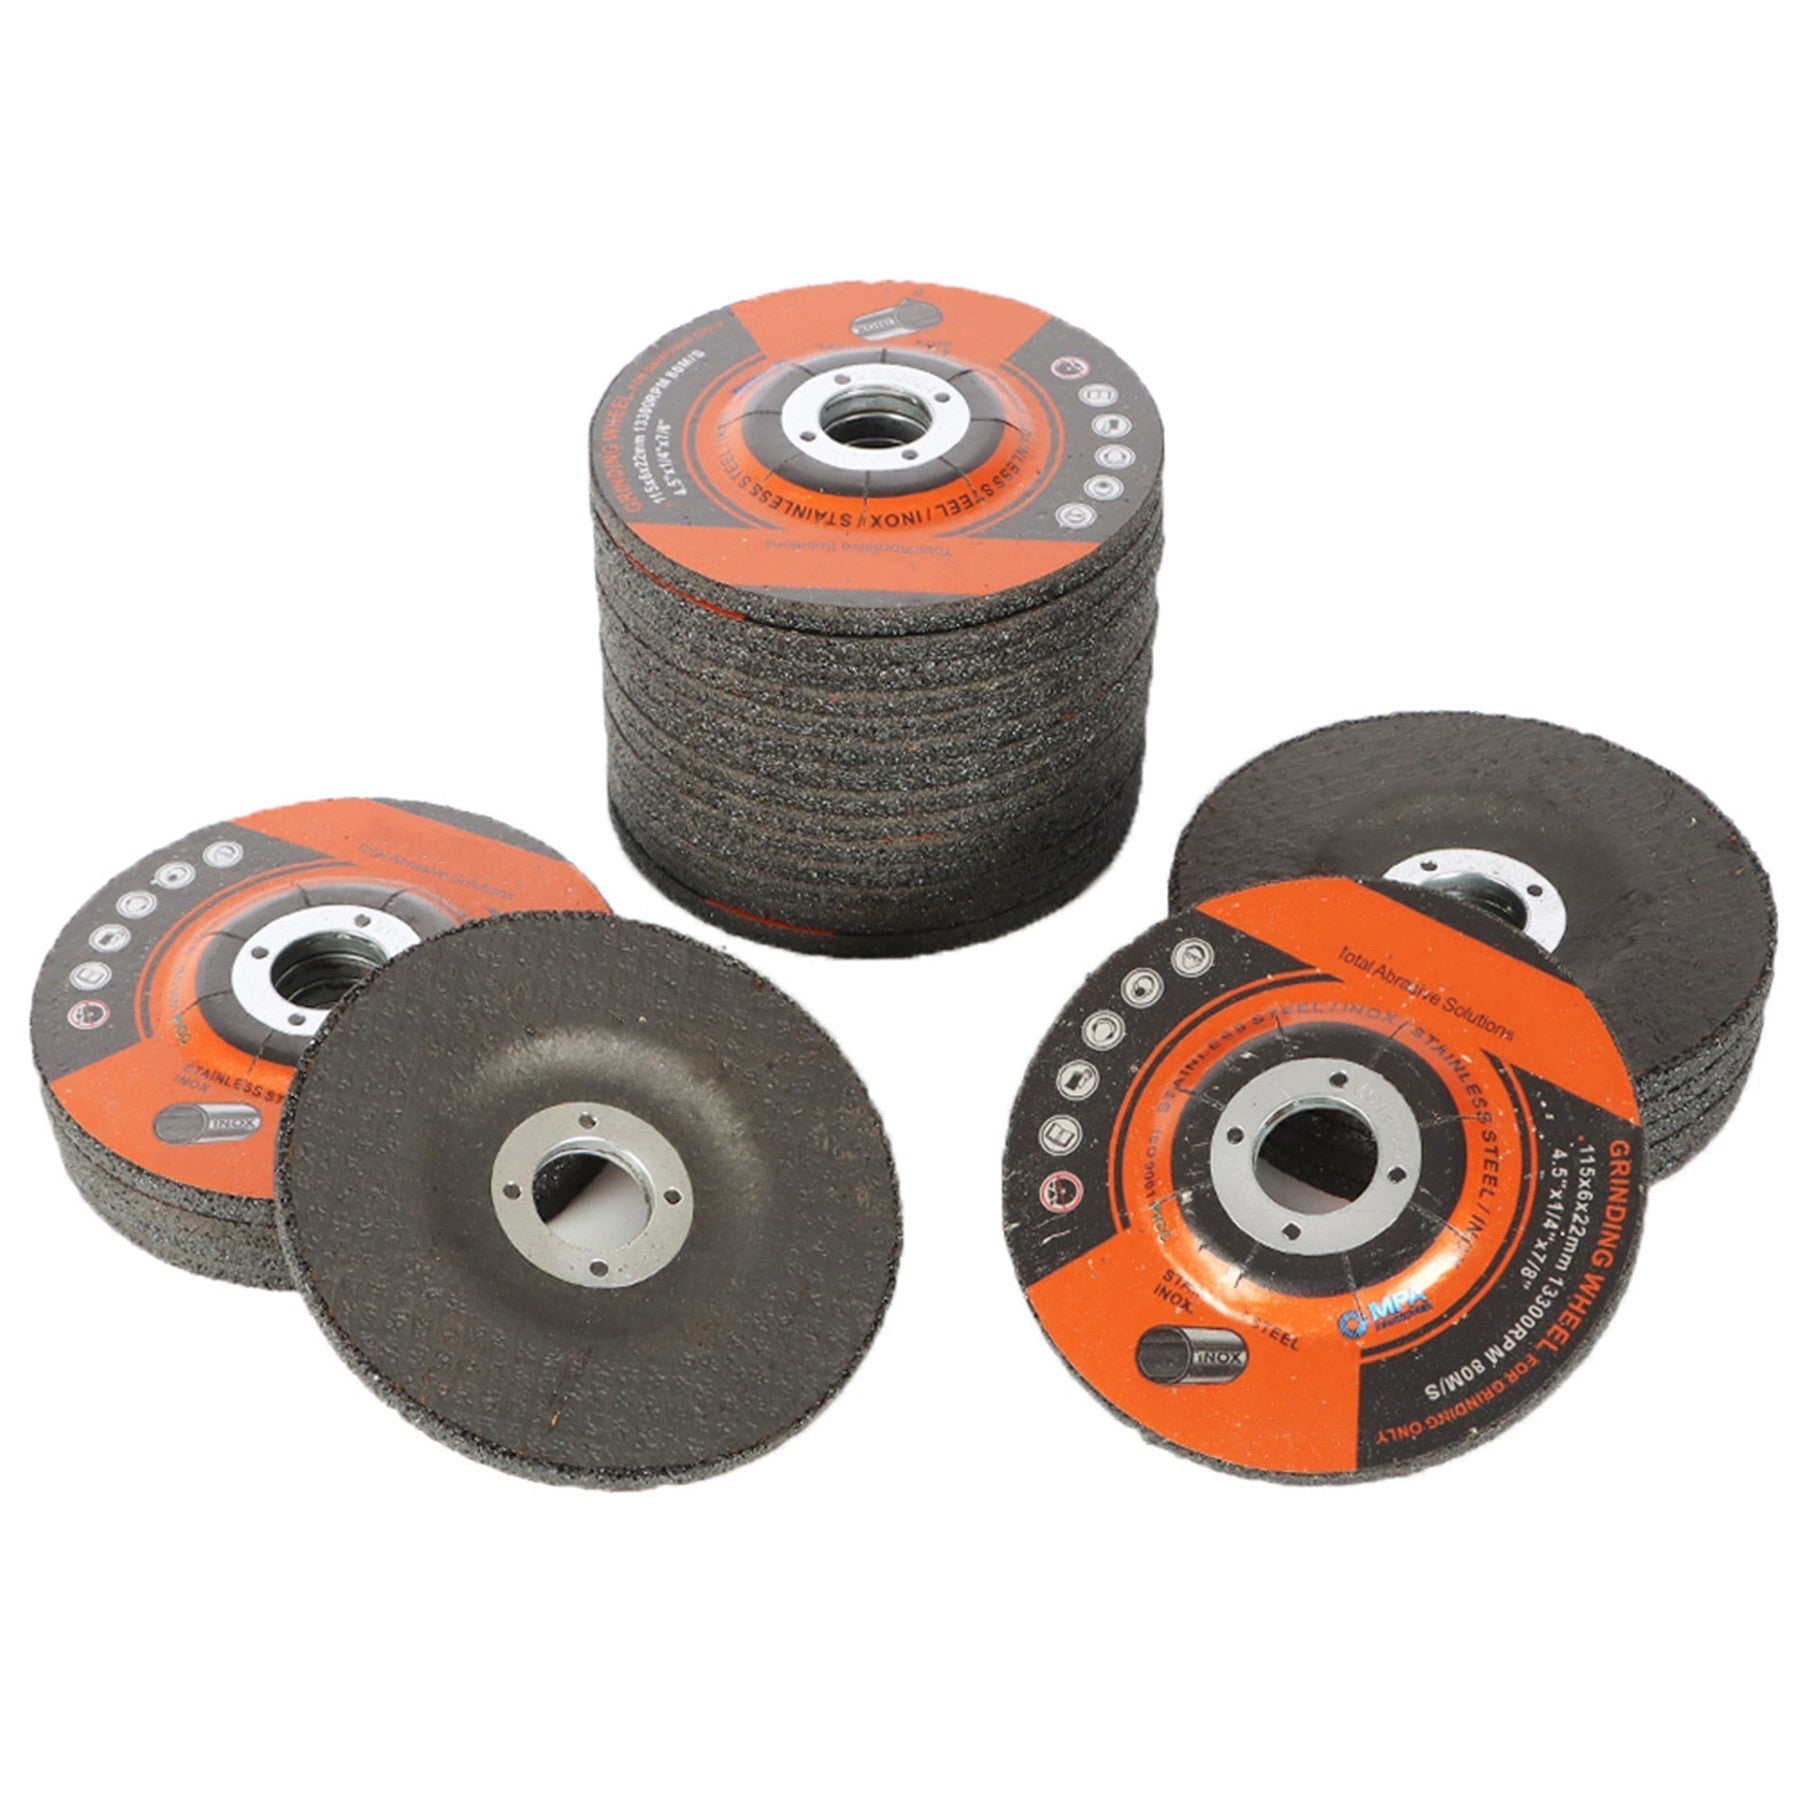 25 Pieces Grinding Wheels 4-1/2" x 1/4" x 7/8" 4.5 Disc Angle Grinder Wheels FINDMALLPARTS